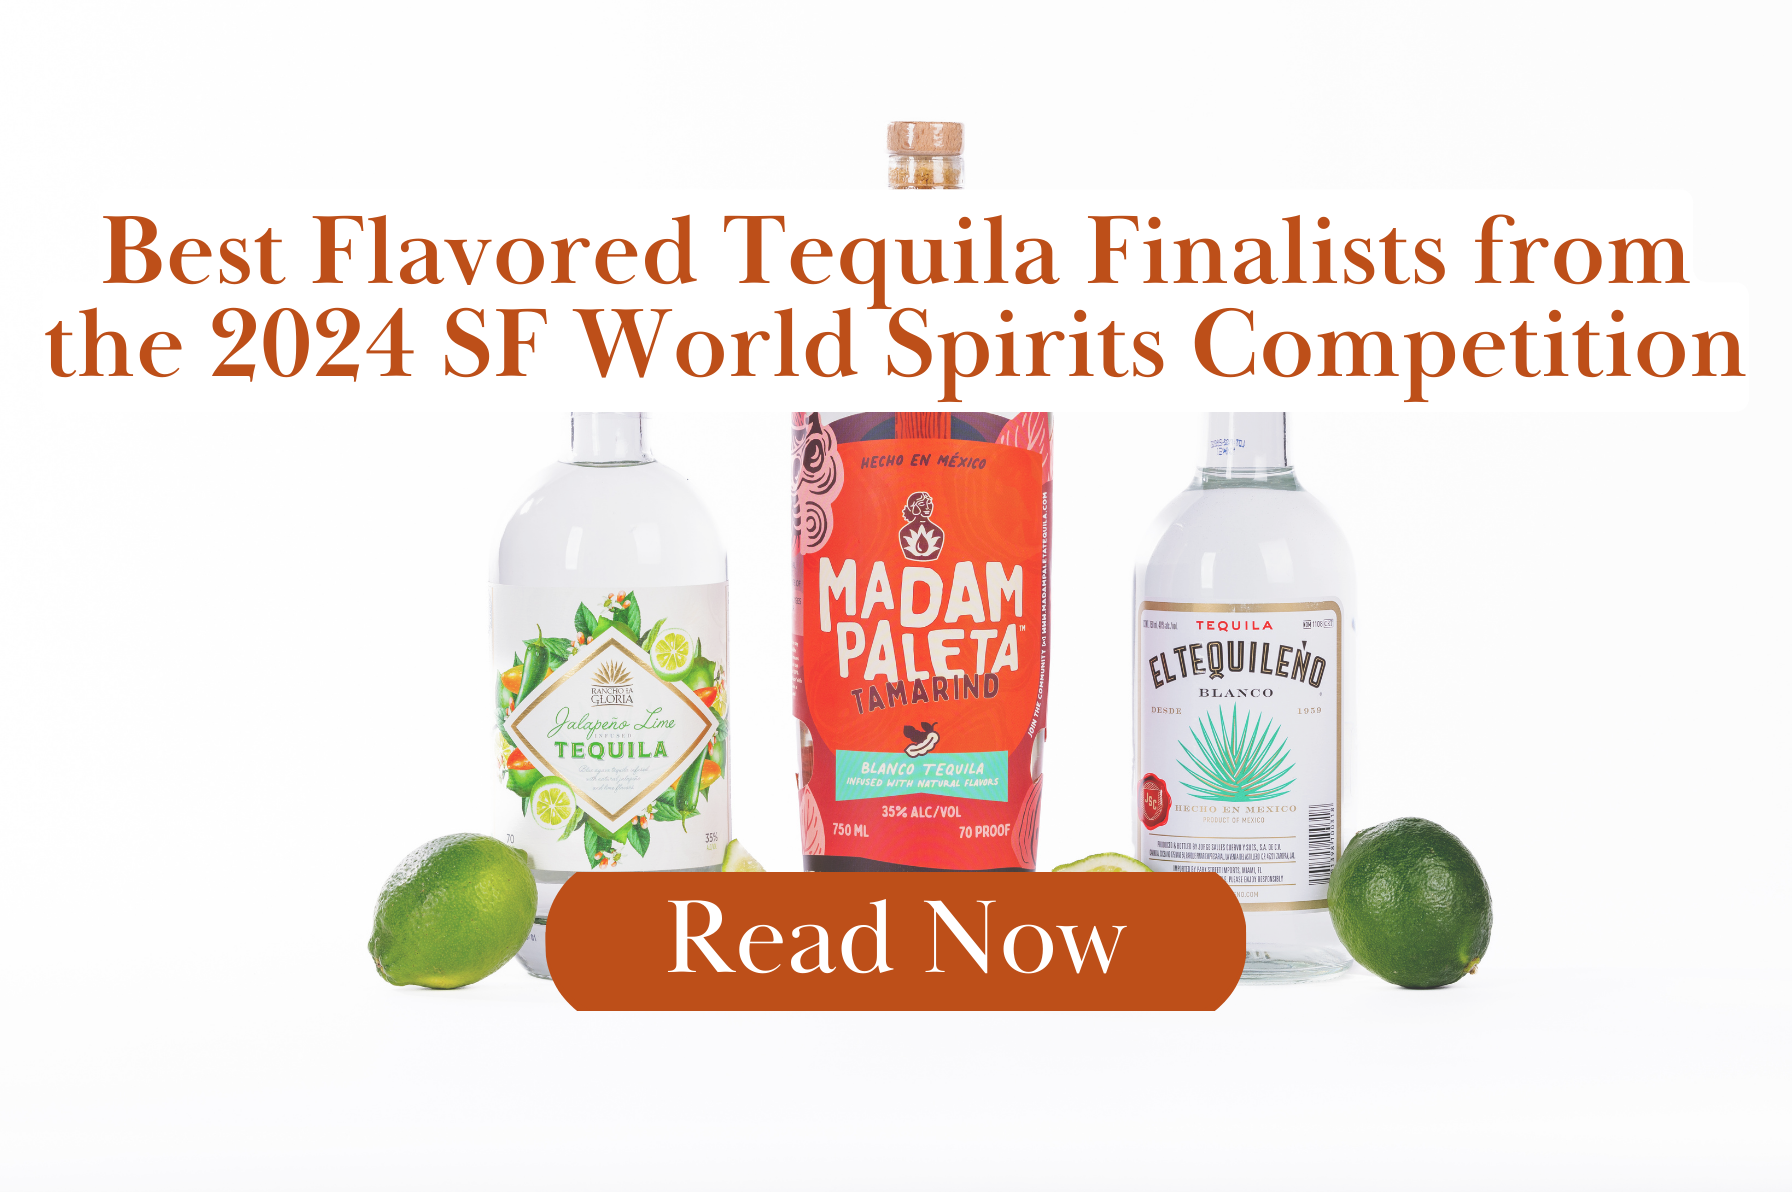 Best Flavored Tequila of the 2024 SFWSC